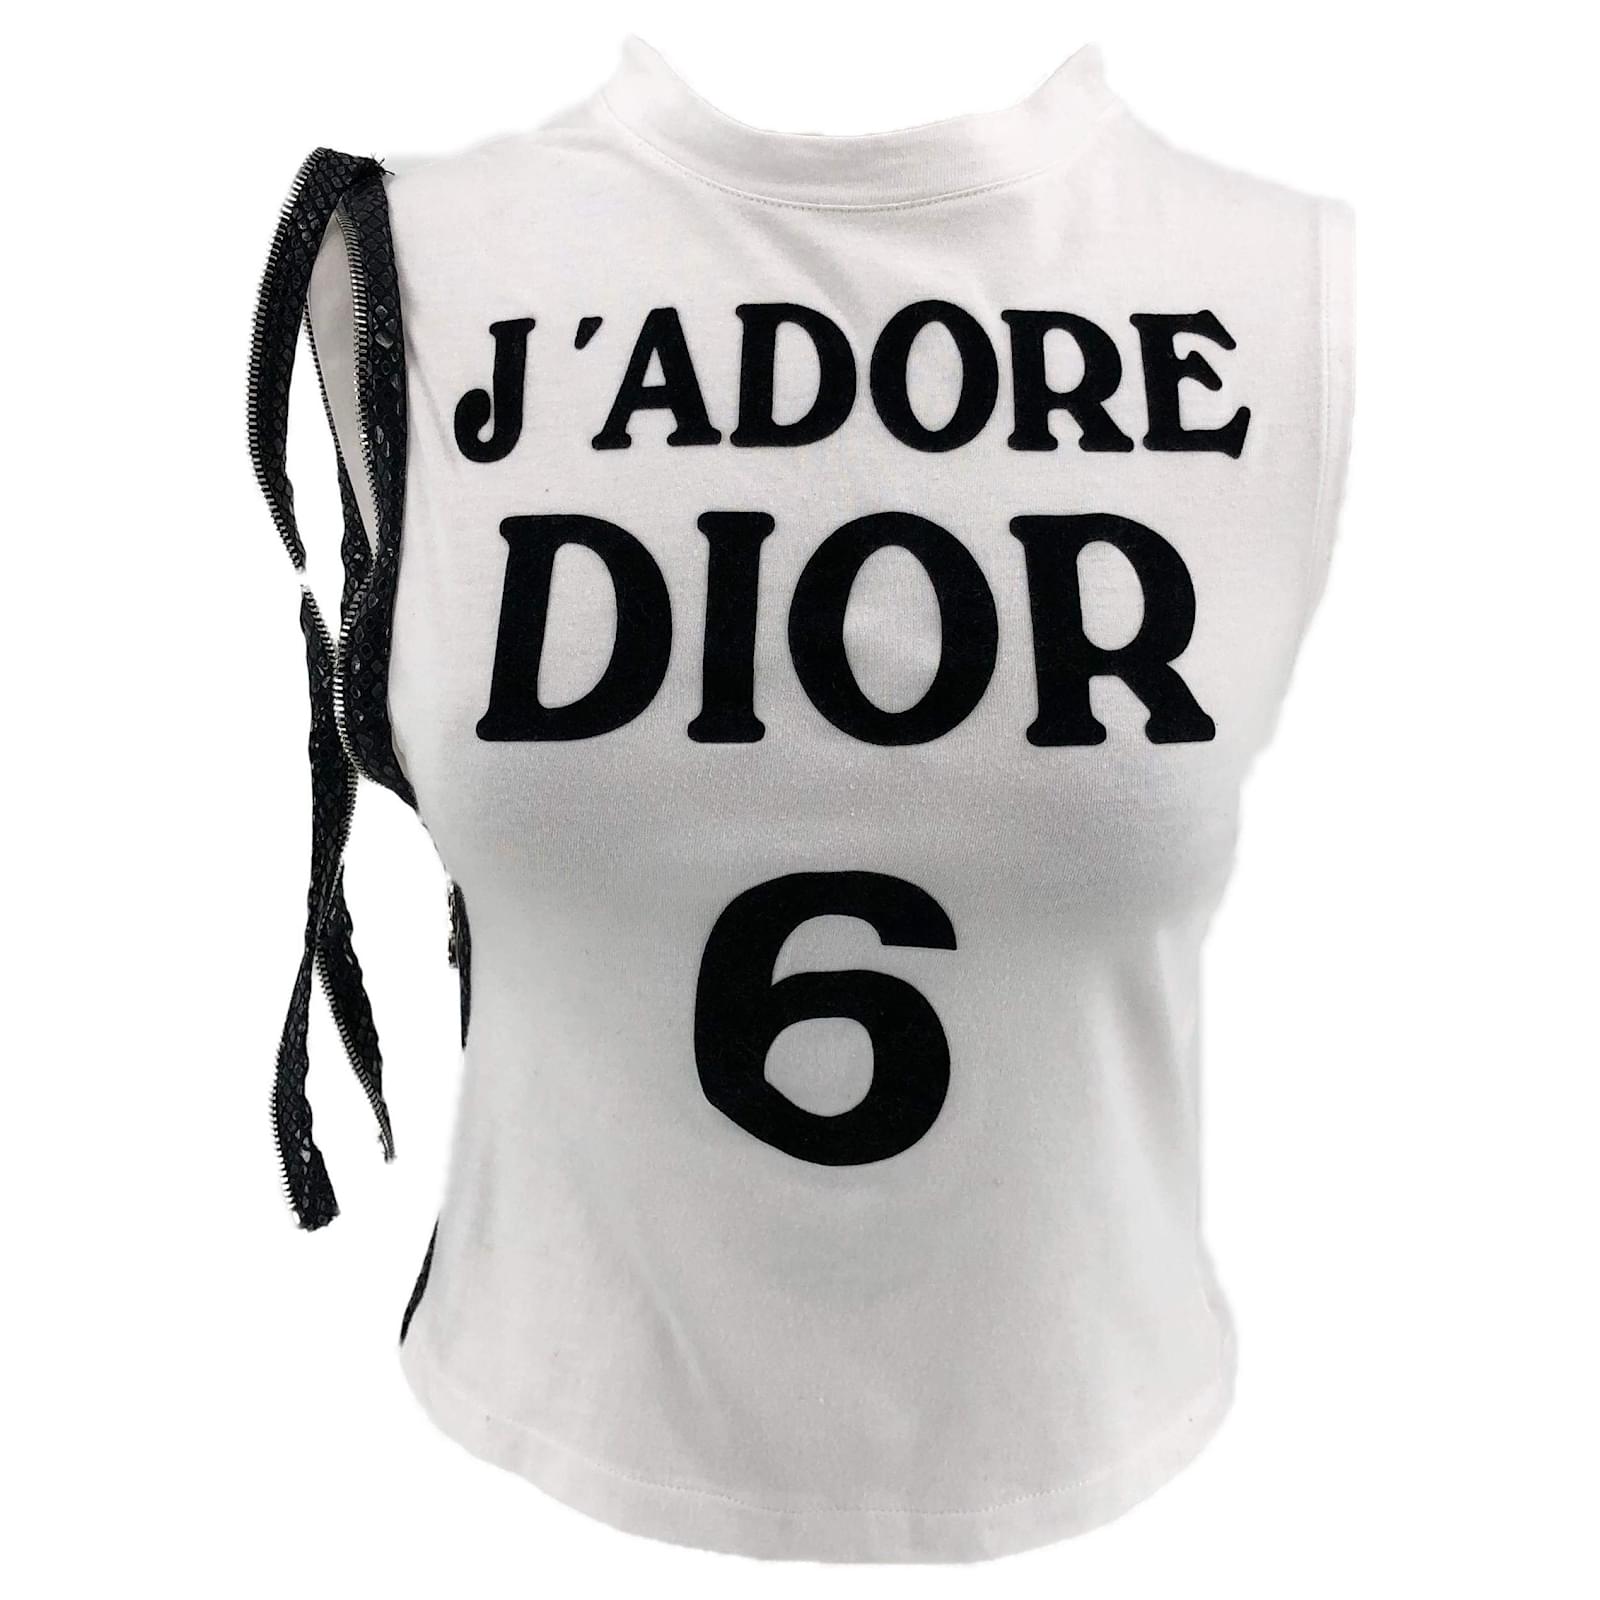 Christian Dior Blue Sleeveless Fitted Tshirt with Jadore Dior  World  Champion 1947 Yellow Wording  XSS  Reign Vintage